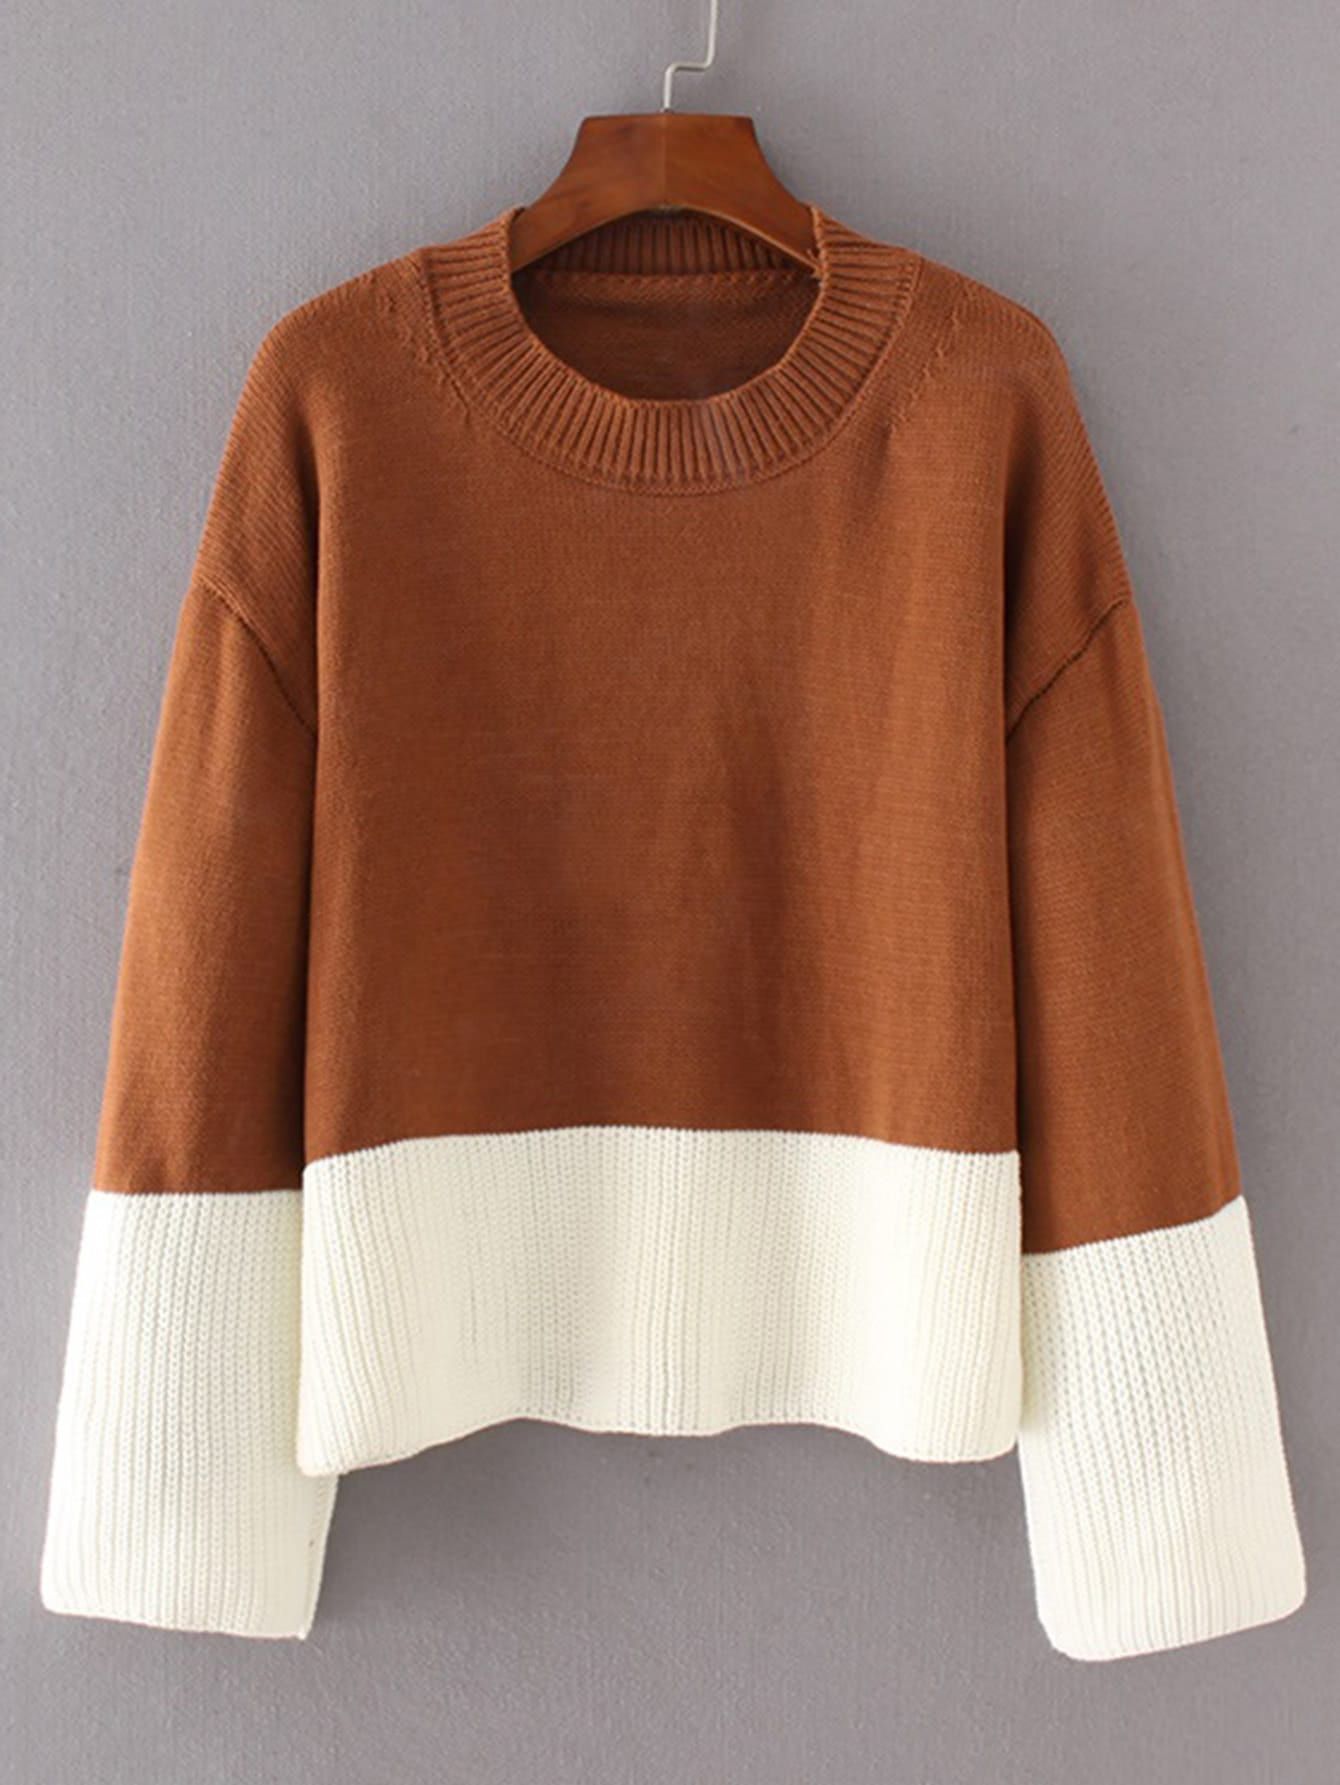 Two Tone Ripped Knit Sweater | SHEIN